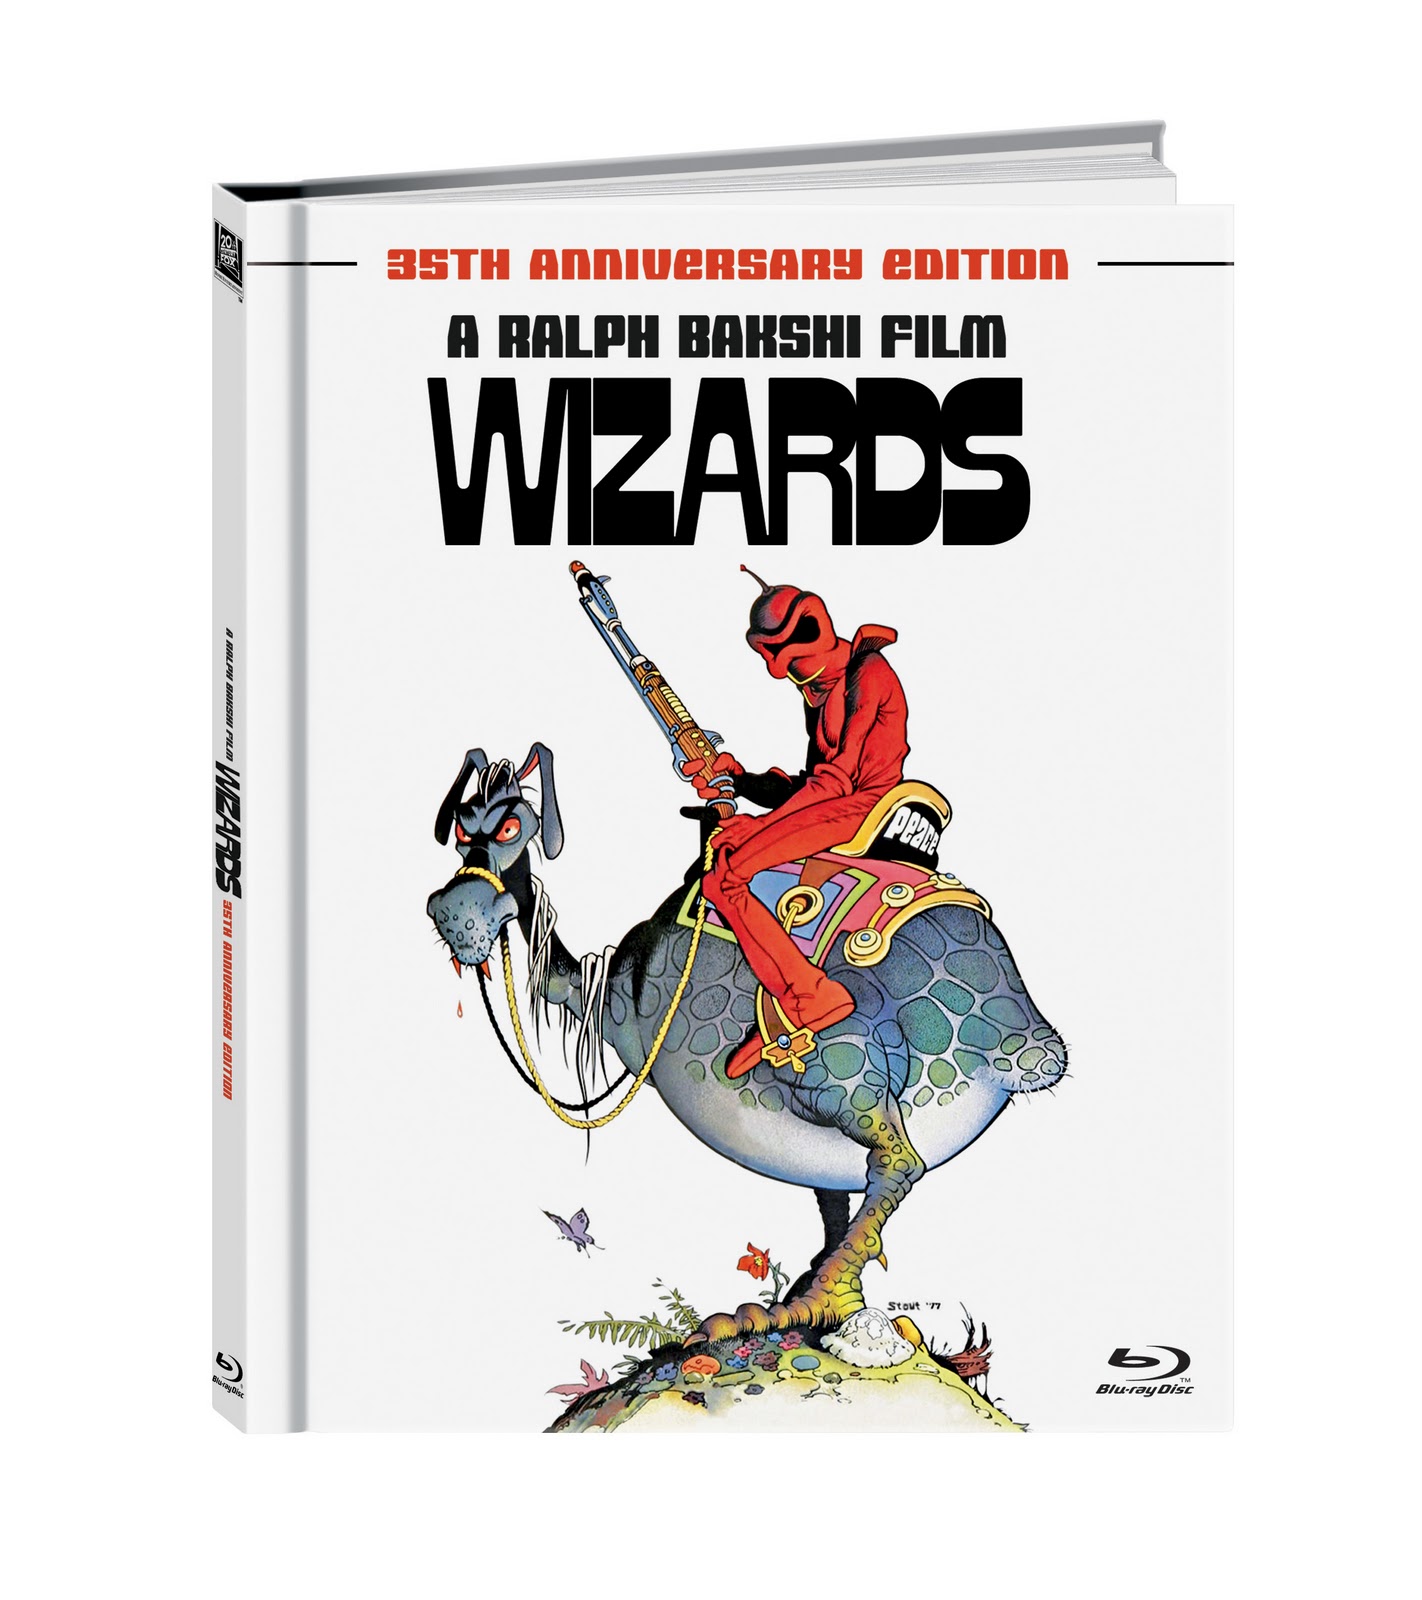 The 35th Anniversary of “Wizards” Available on Blu-ray March 13th